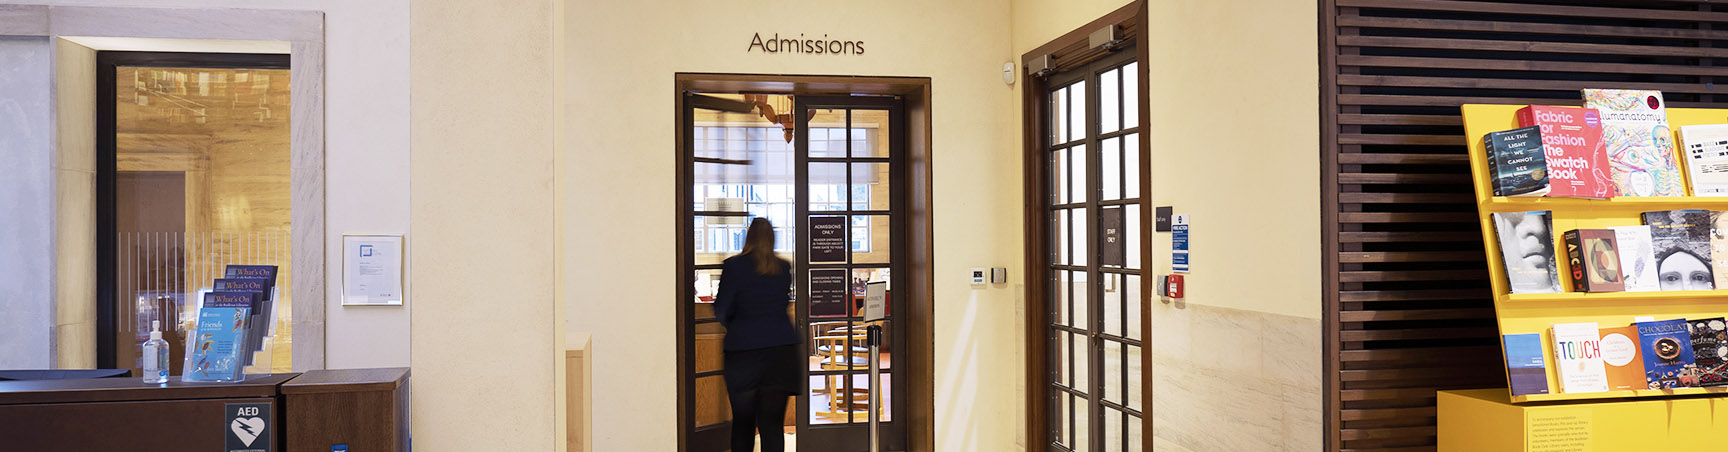 The door to the Admissions Office between an information desk and a shelf of books in Blackwell Hall at the Weston Library